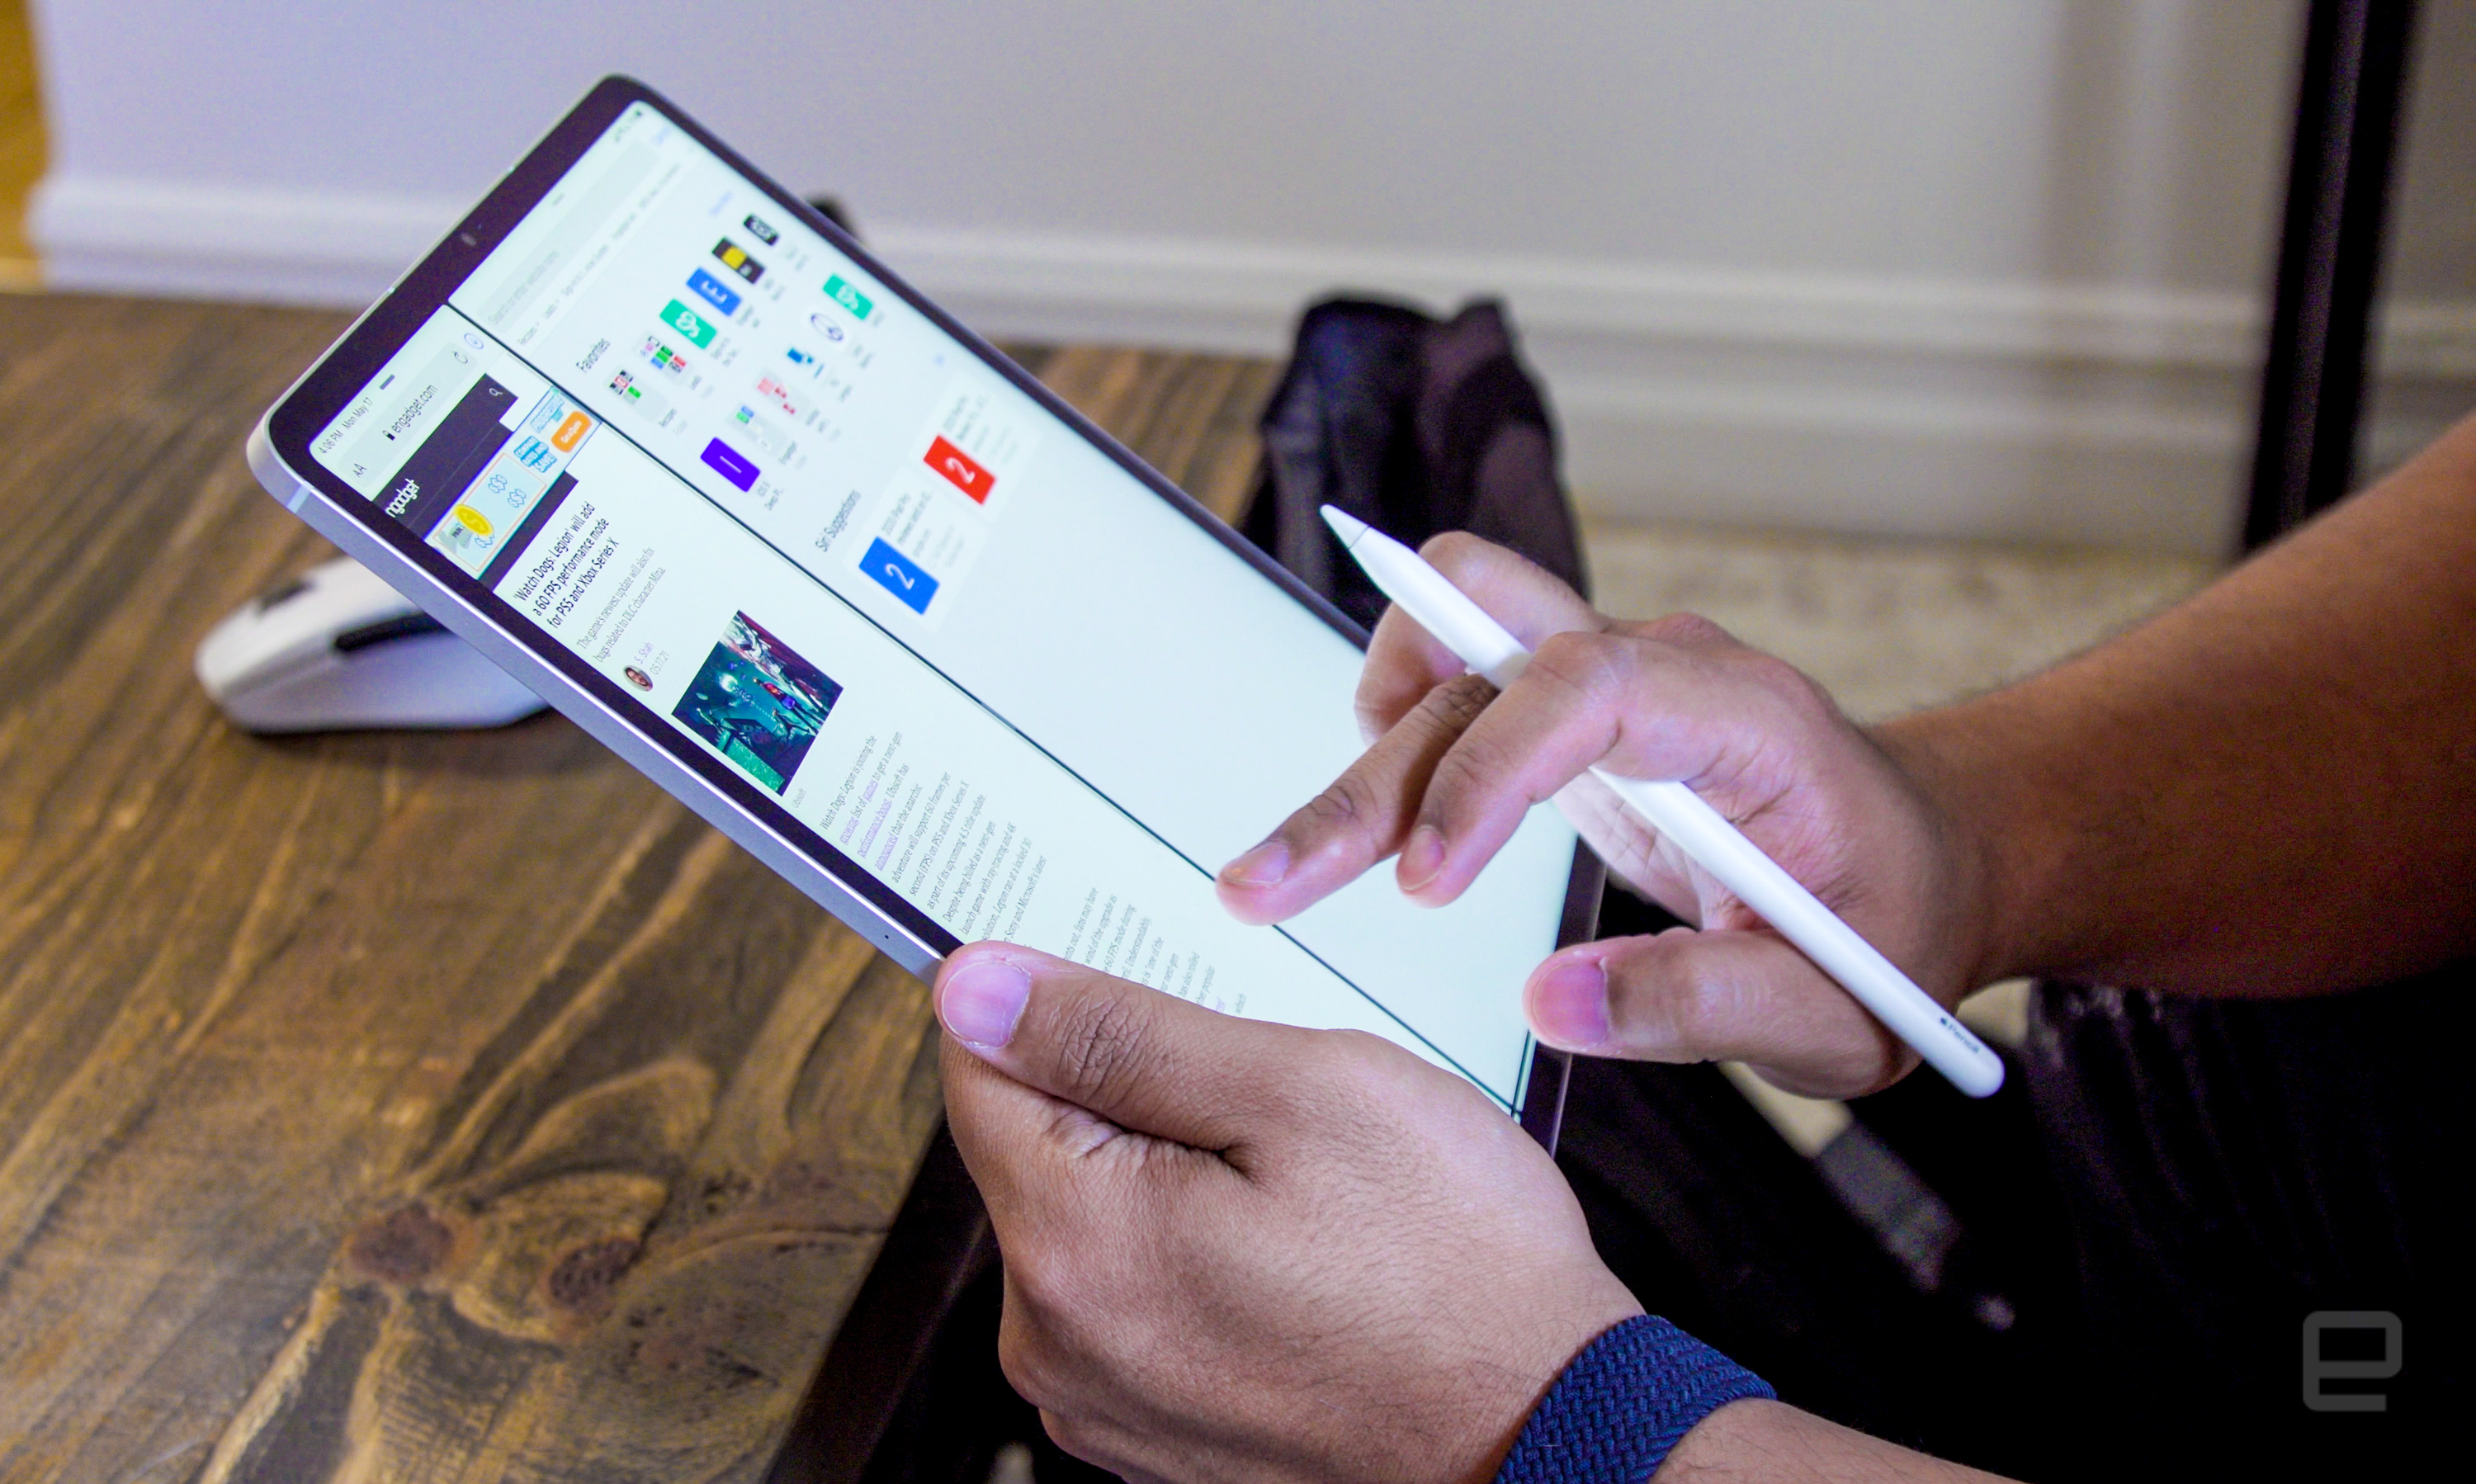 Apple is reportedly exploring iPad designs with supersized displays